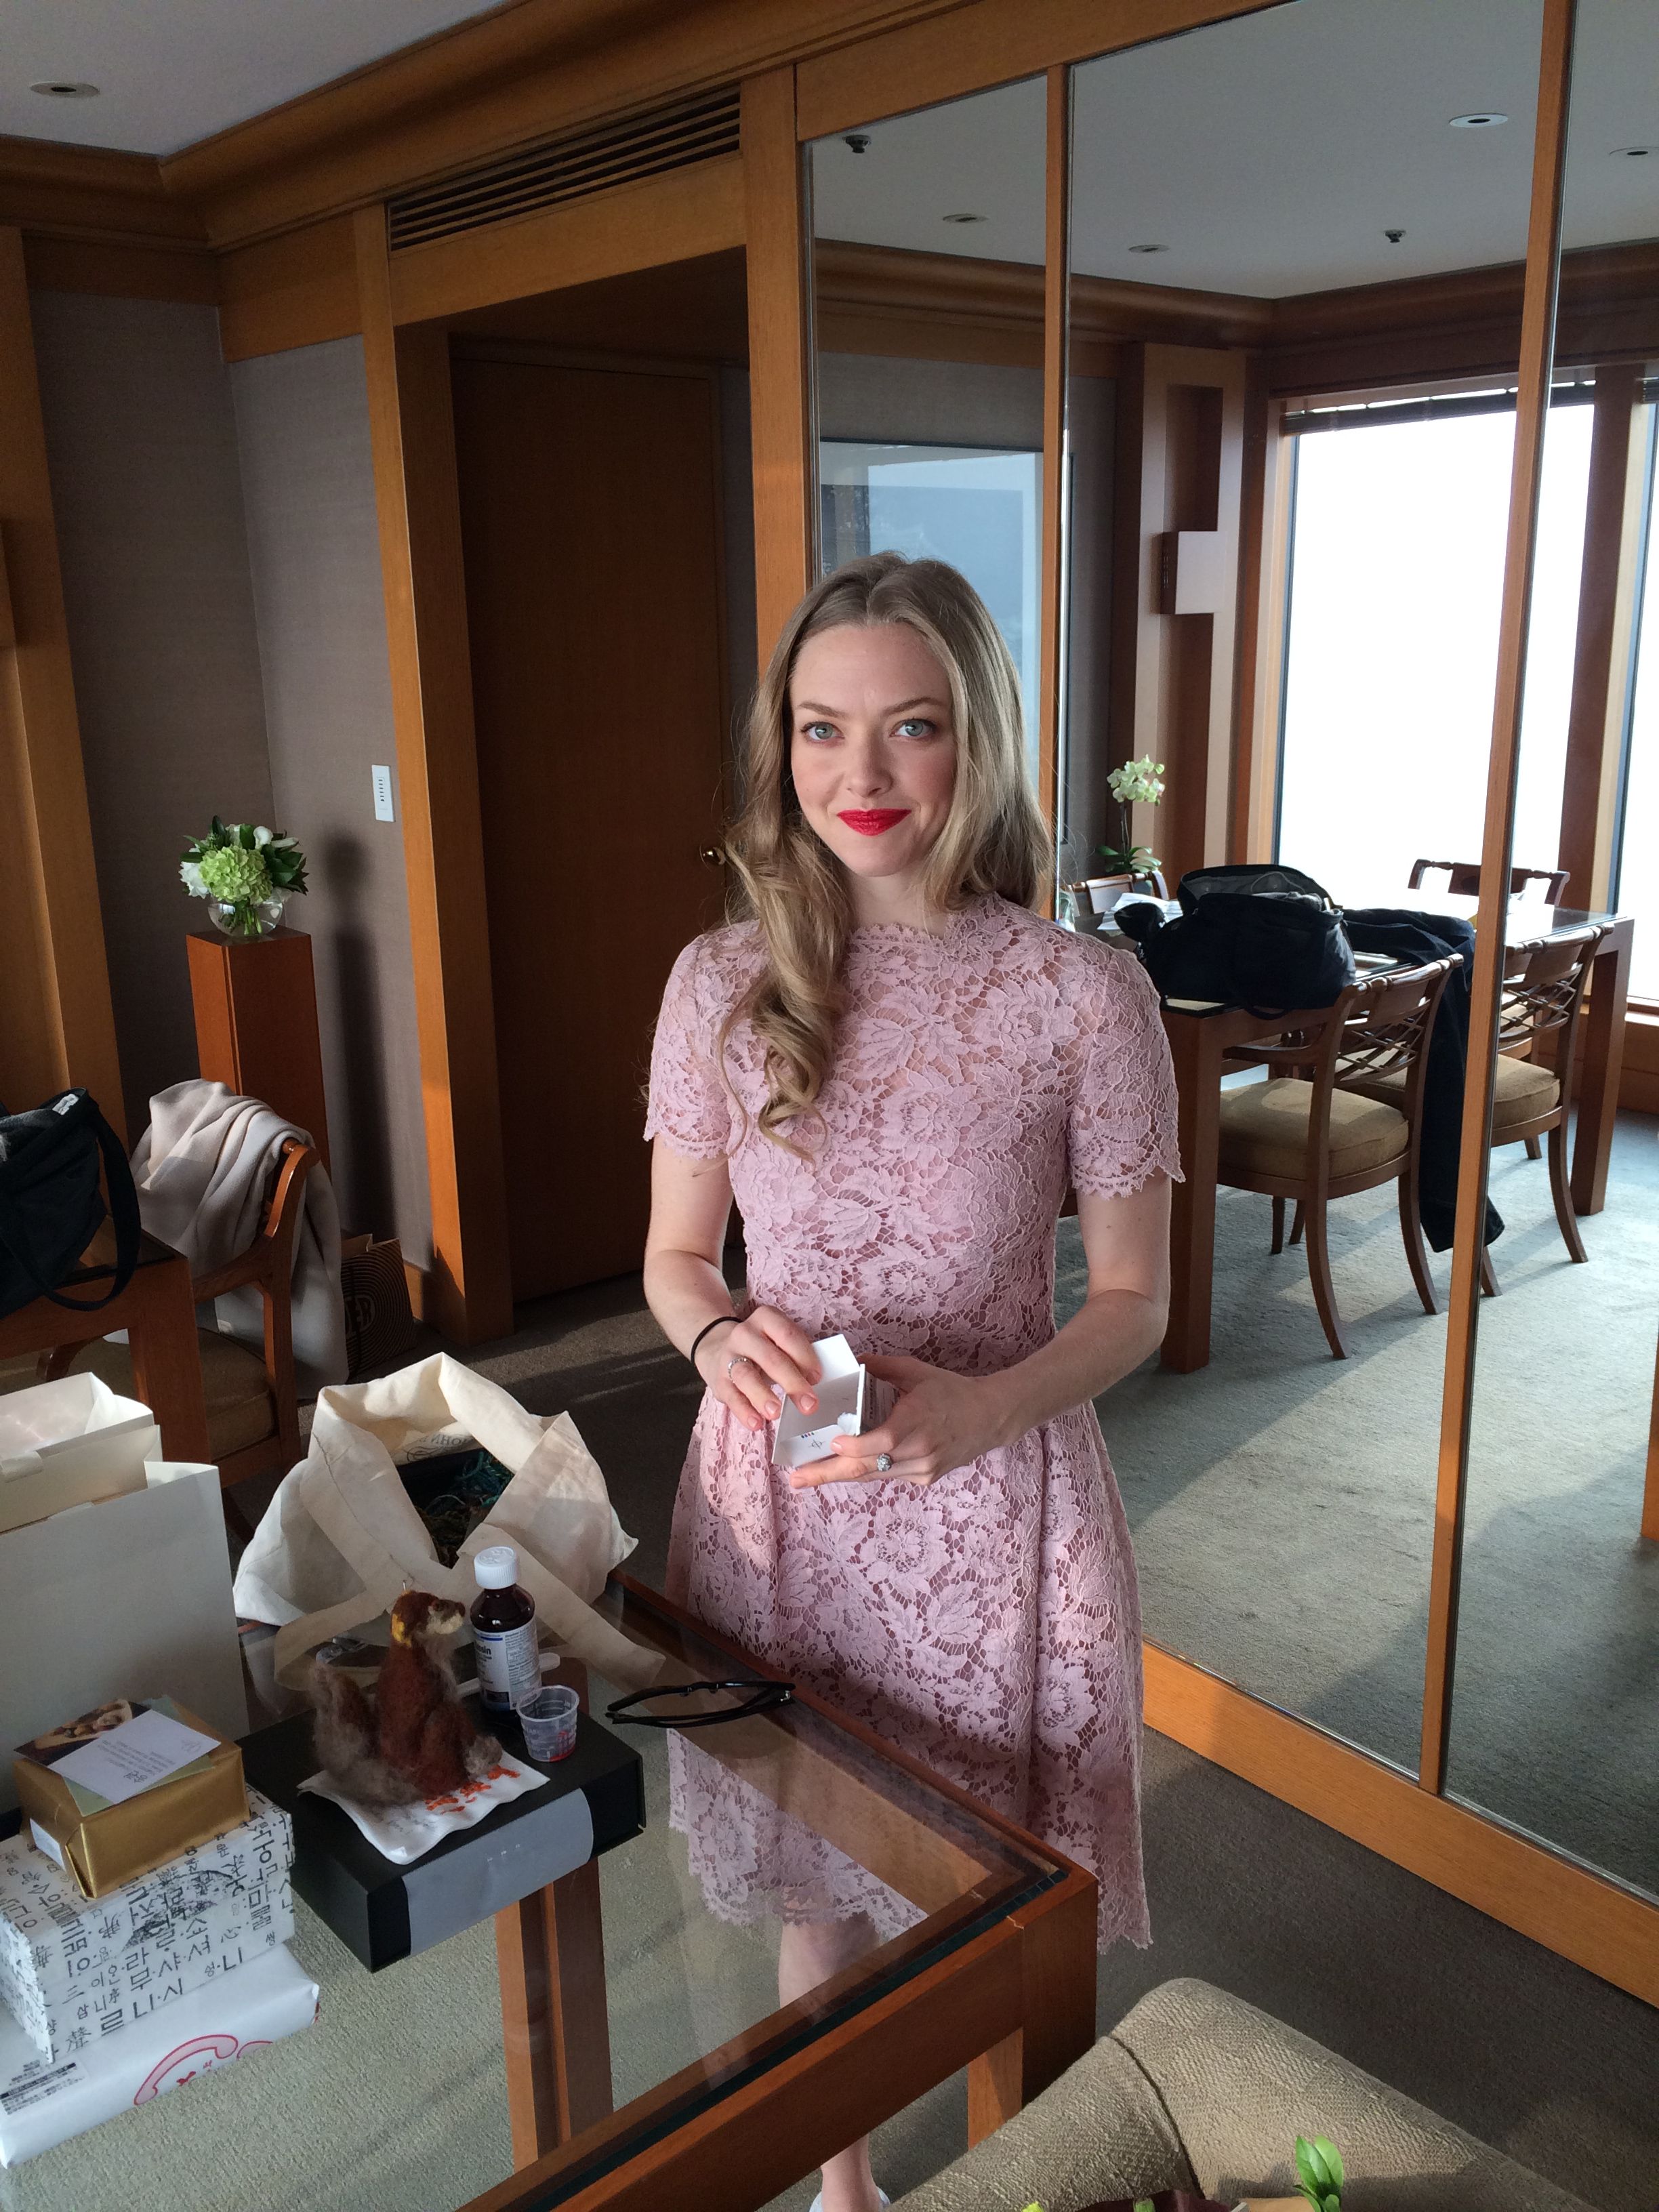 Full Collection of Amanda Seyfried Leaked Photos